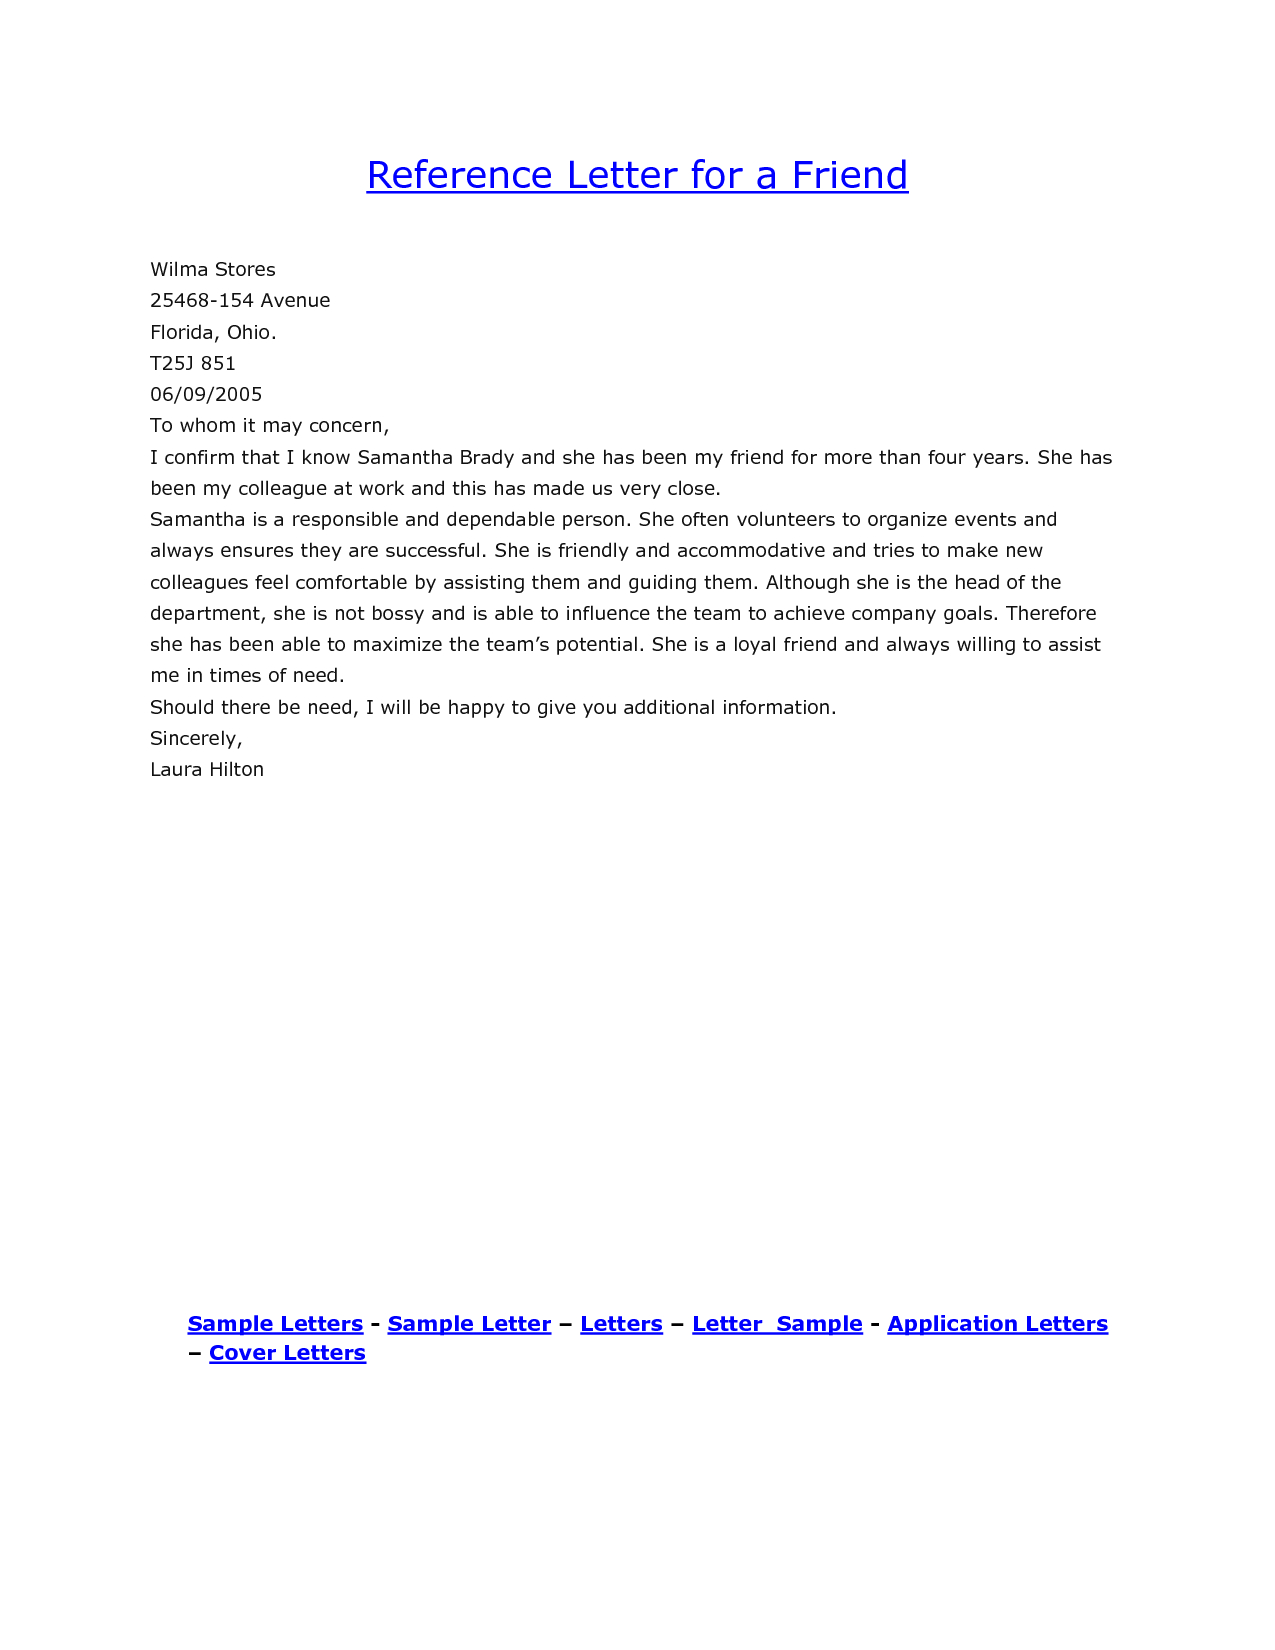 Reference Letter Sample For A Friend Yahoo Search Results within size 1275 X 1650